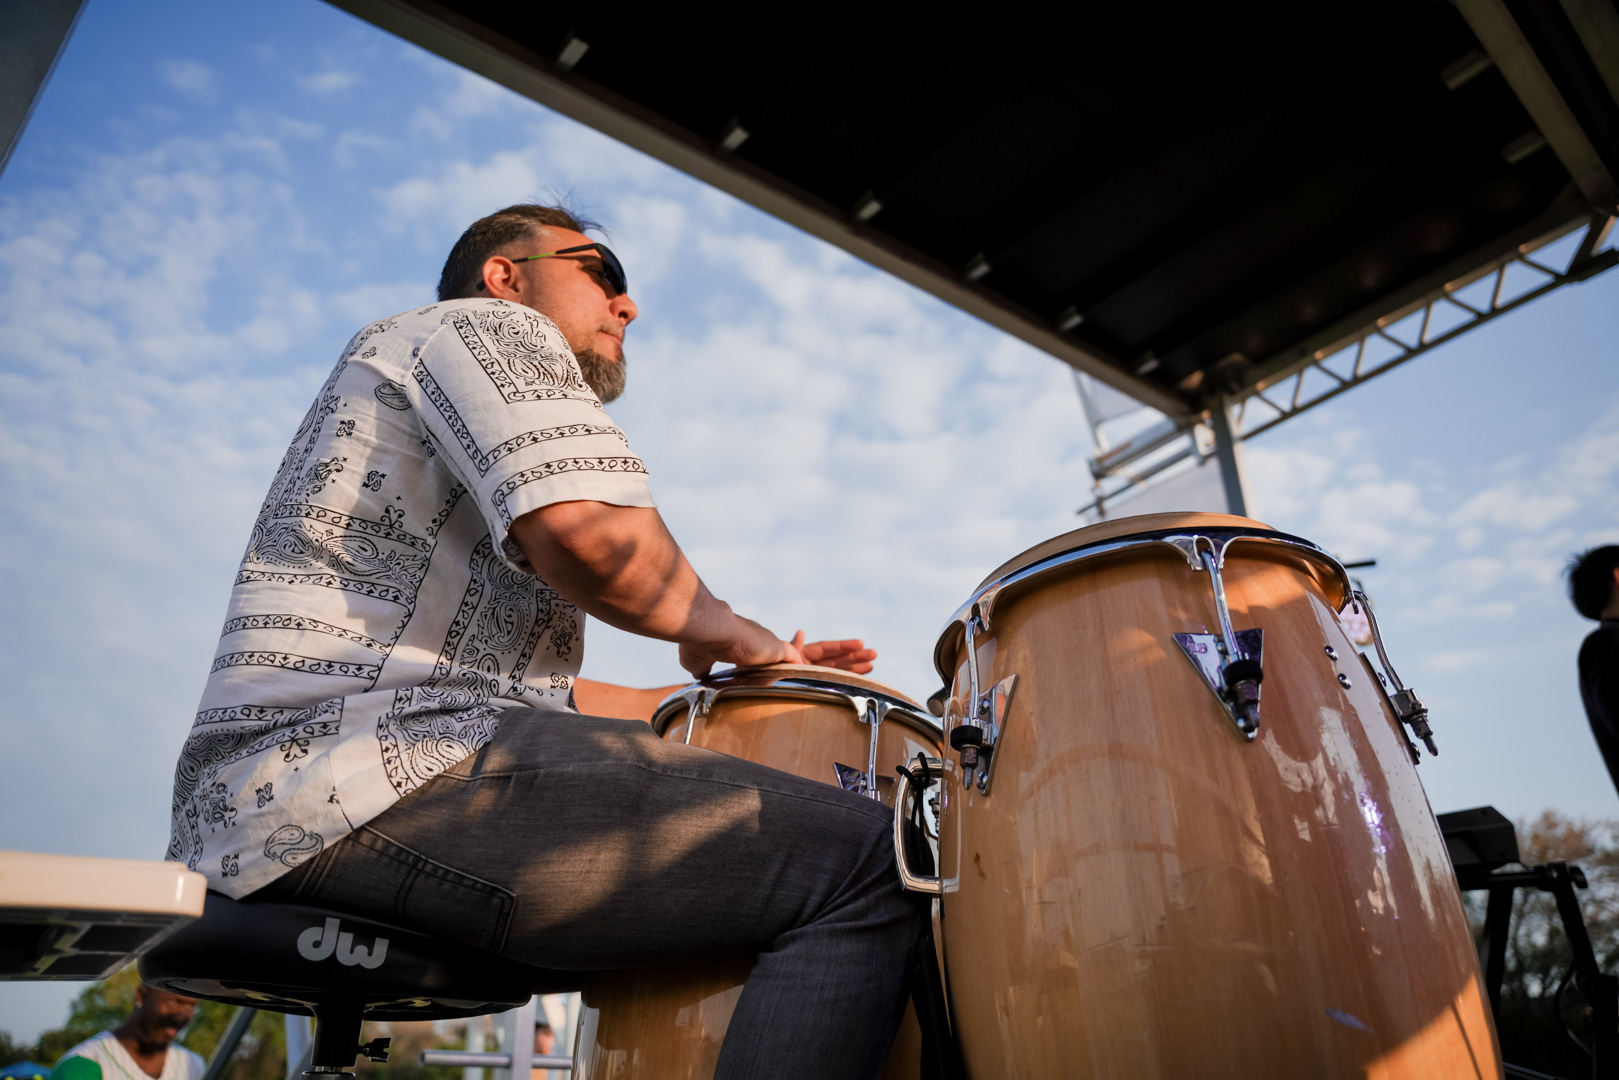 A percussionist on stage